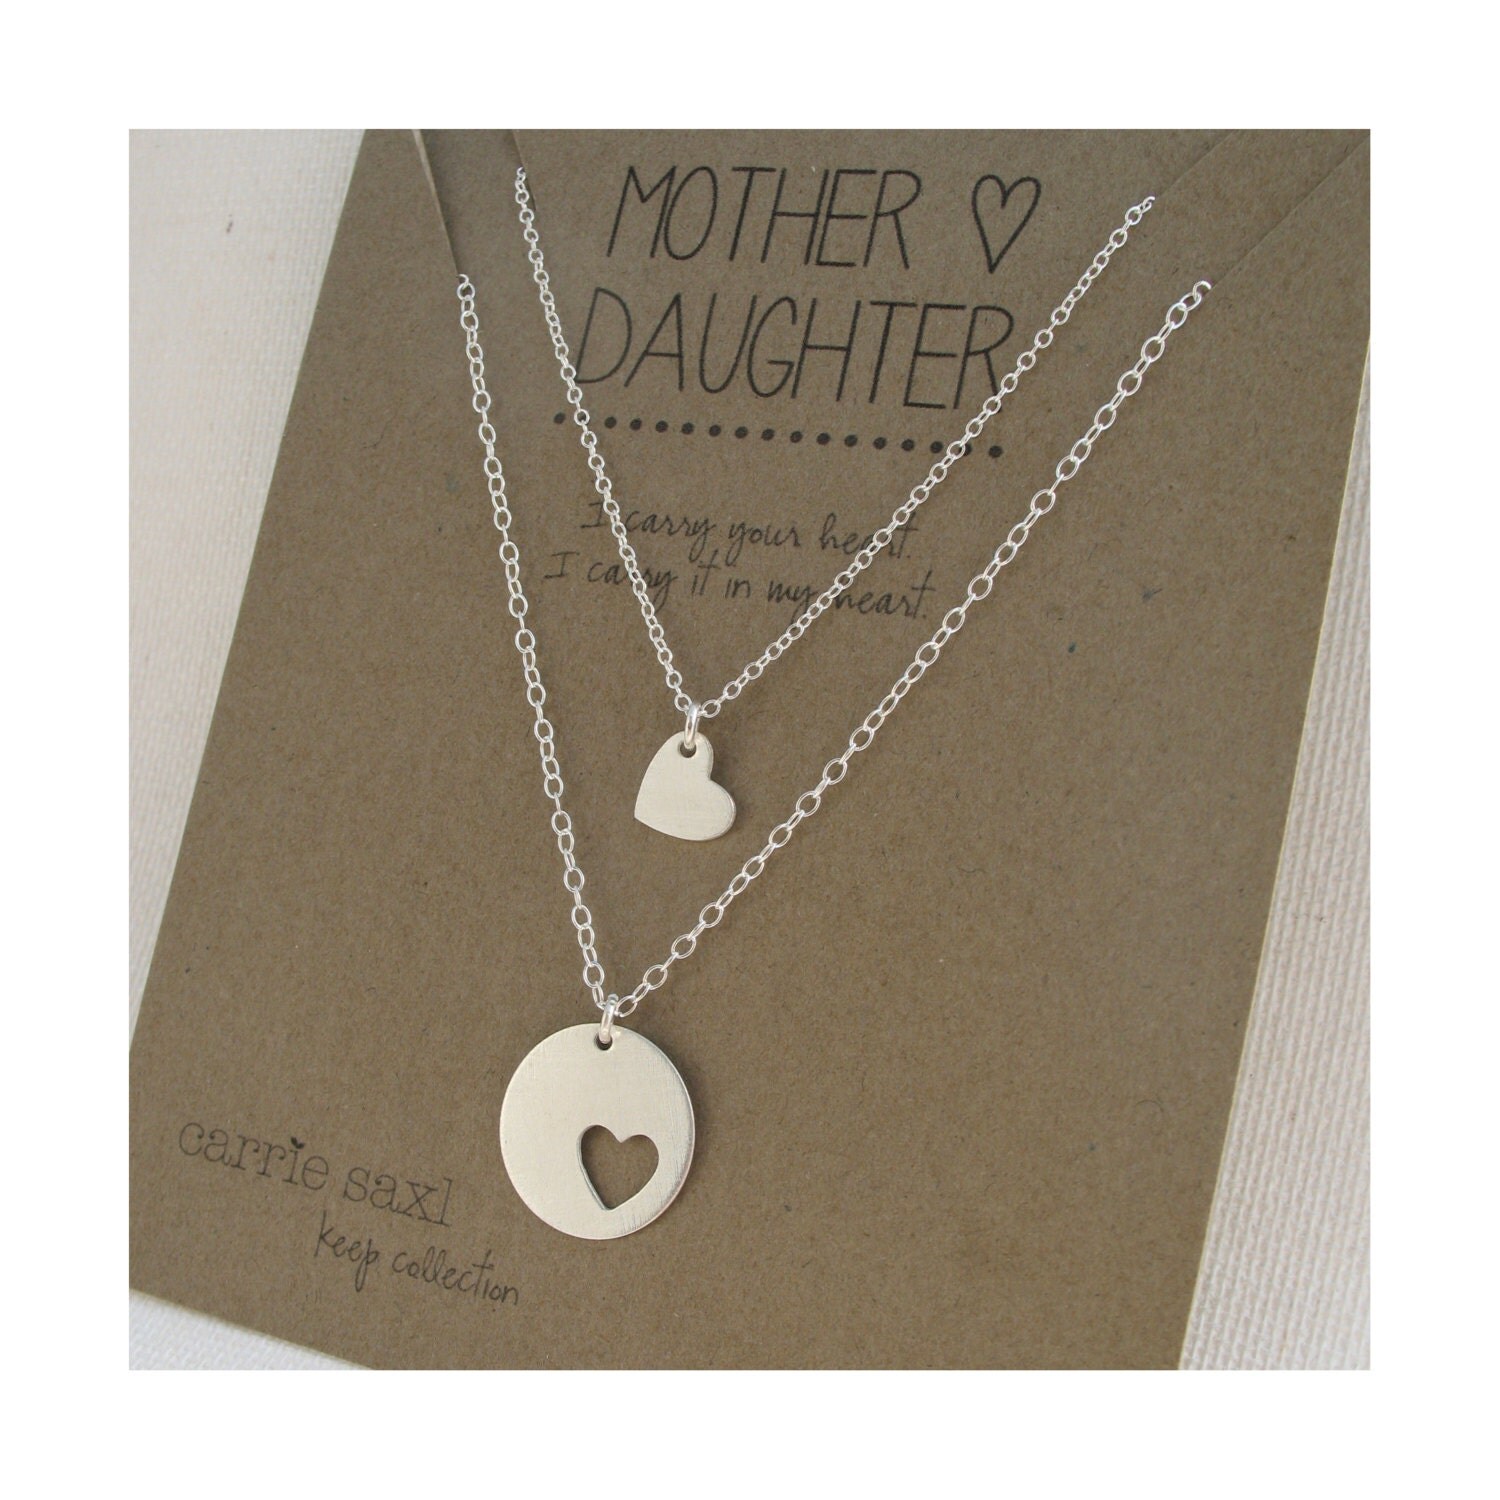 Mother Daughter Necklace Set hearts necklace by carriesaxl